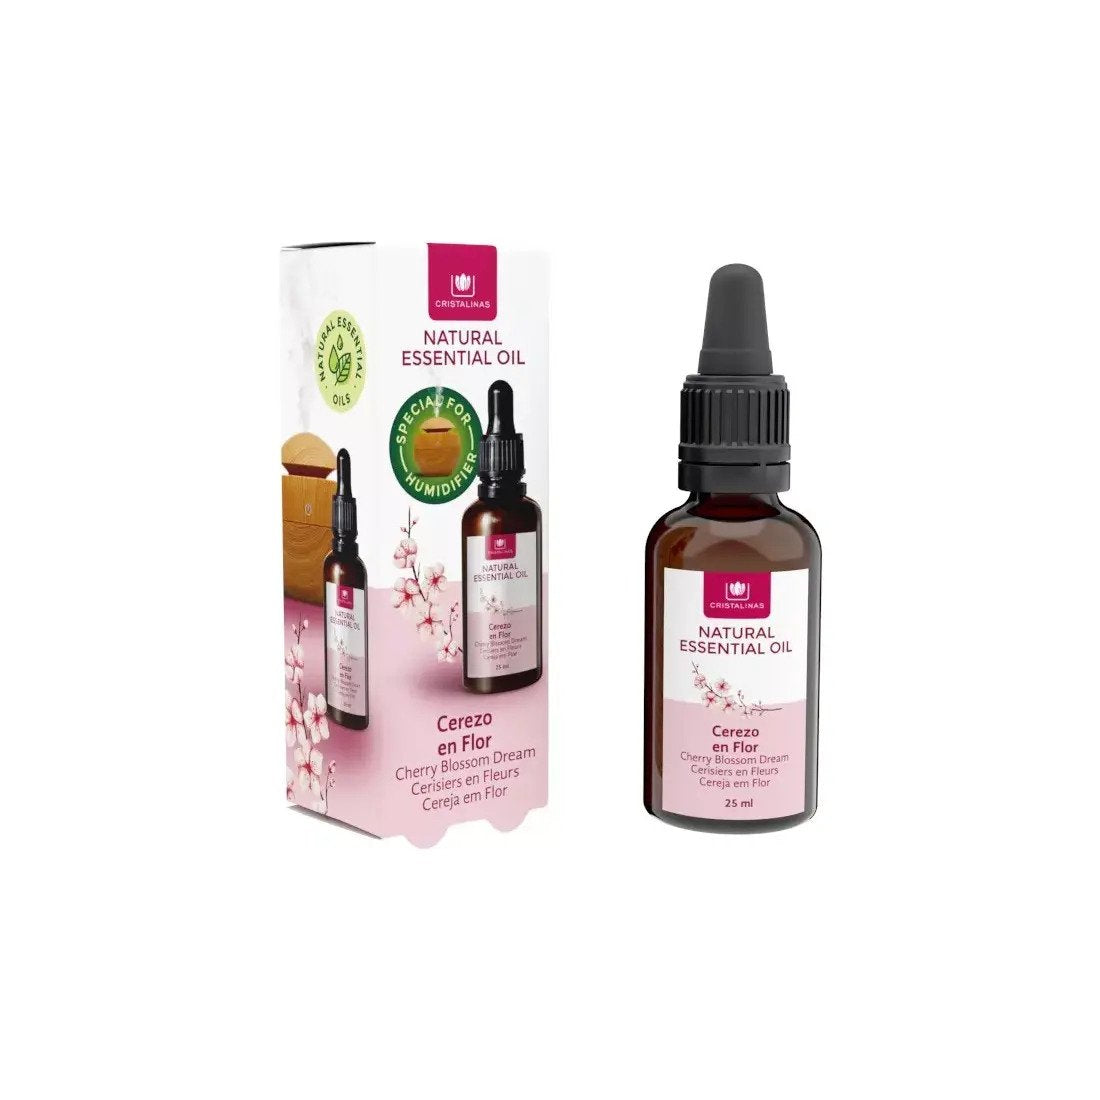 Cristalinas Cherry Blossom Water-soluble Essential Oils 水溶性櫻花精油 25ml (For diffuser or humidifier 霧化機或香薰機專用)  西班牙直送 Cristalinas